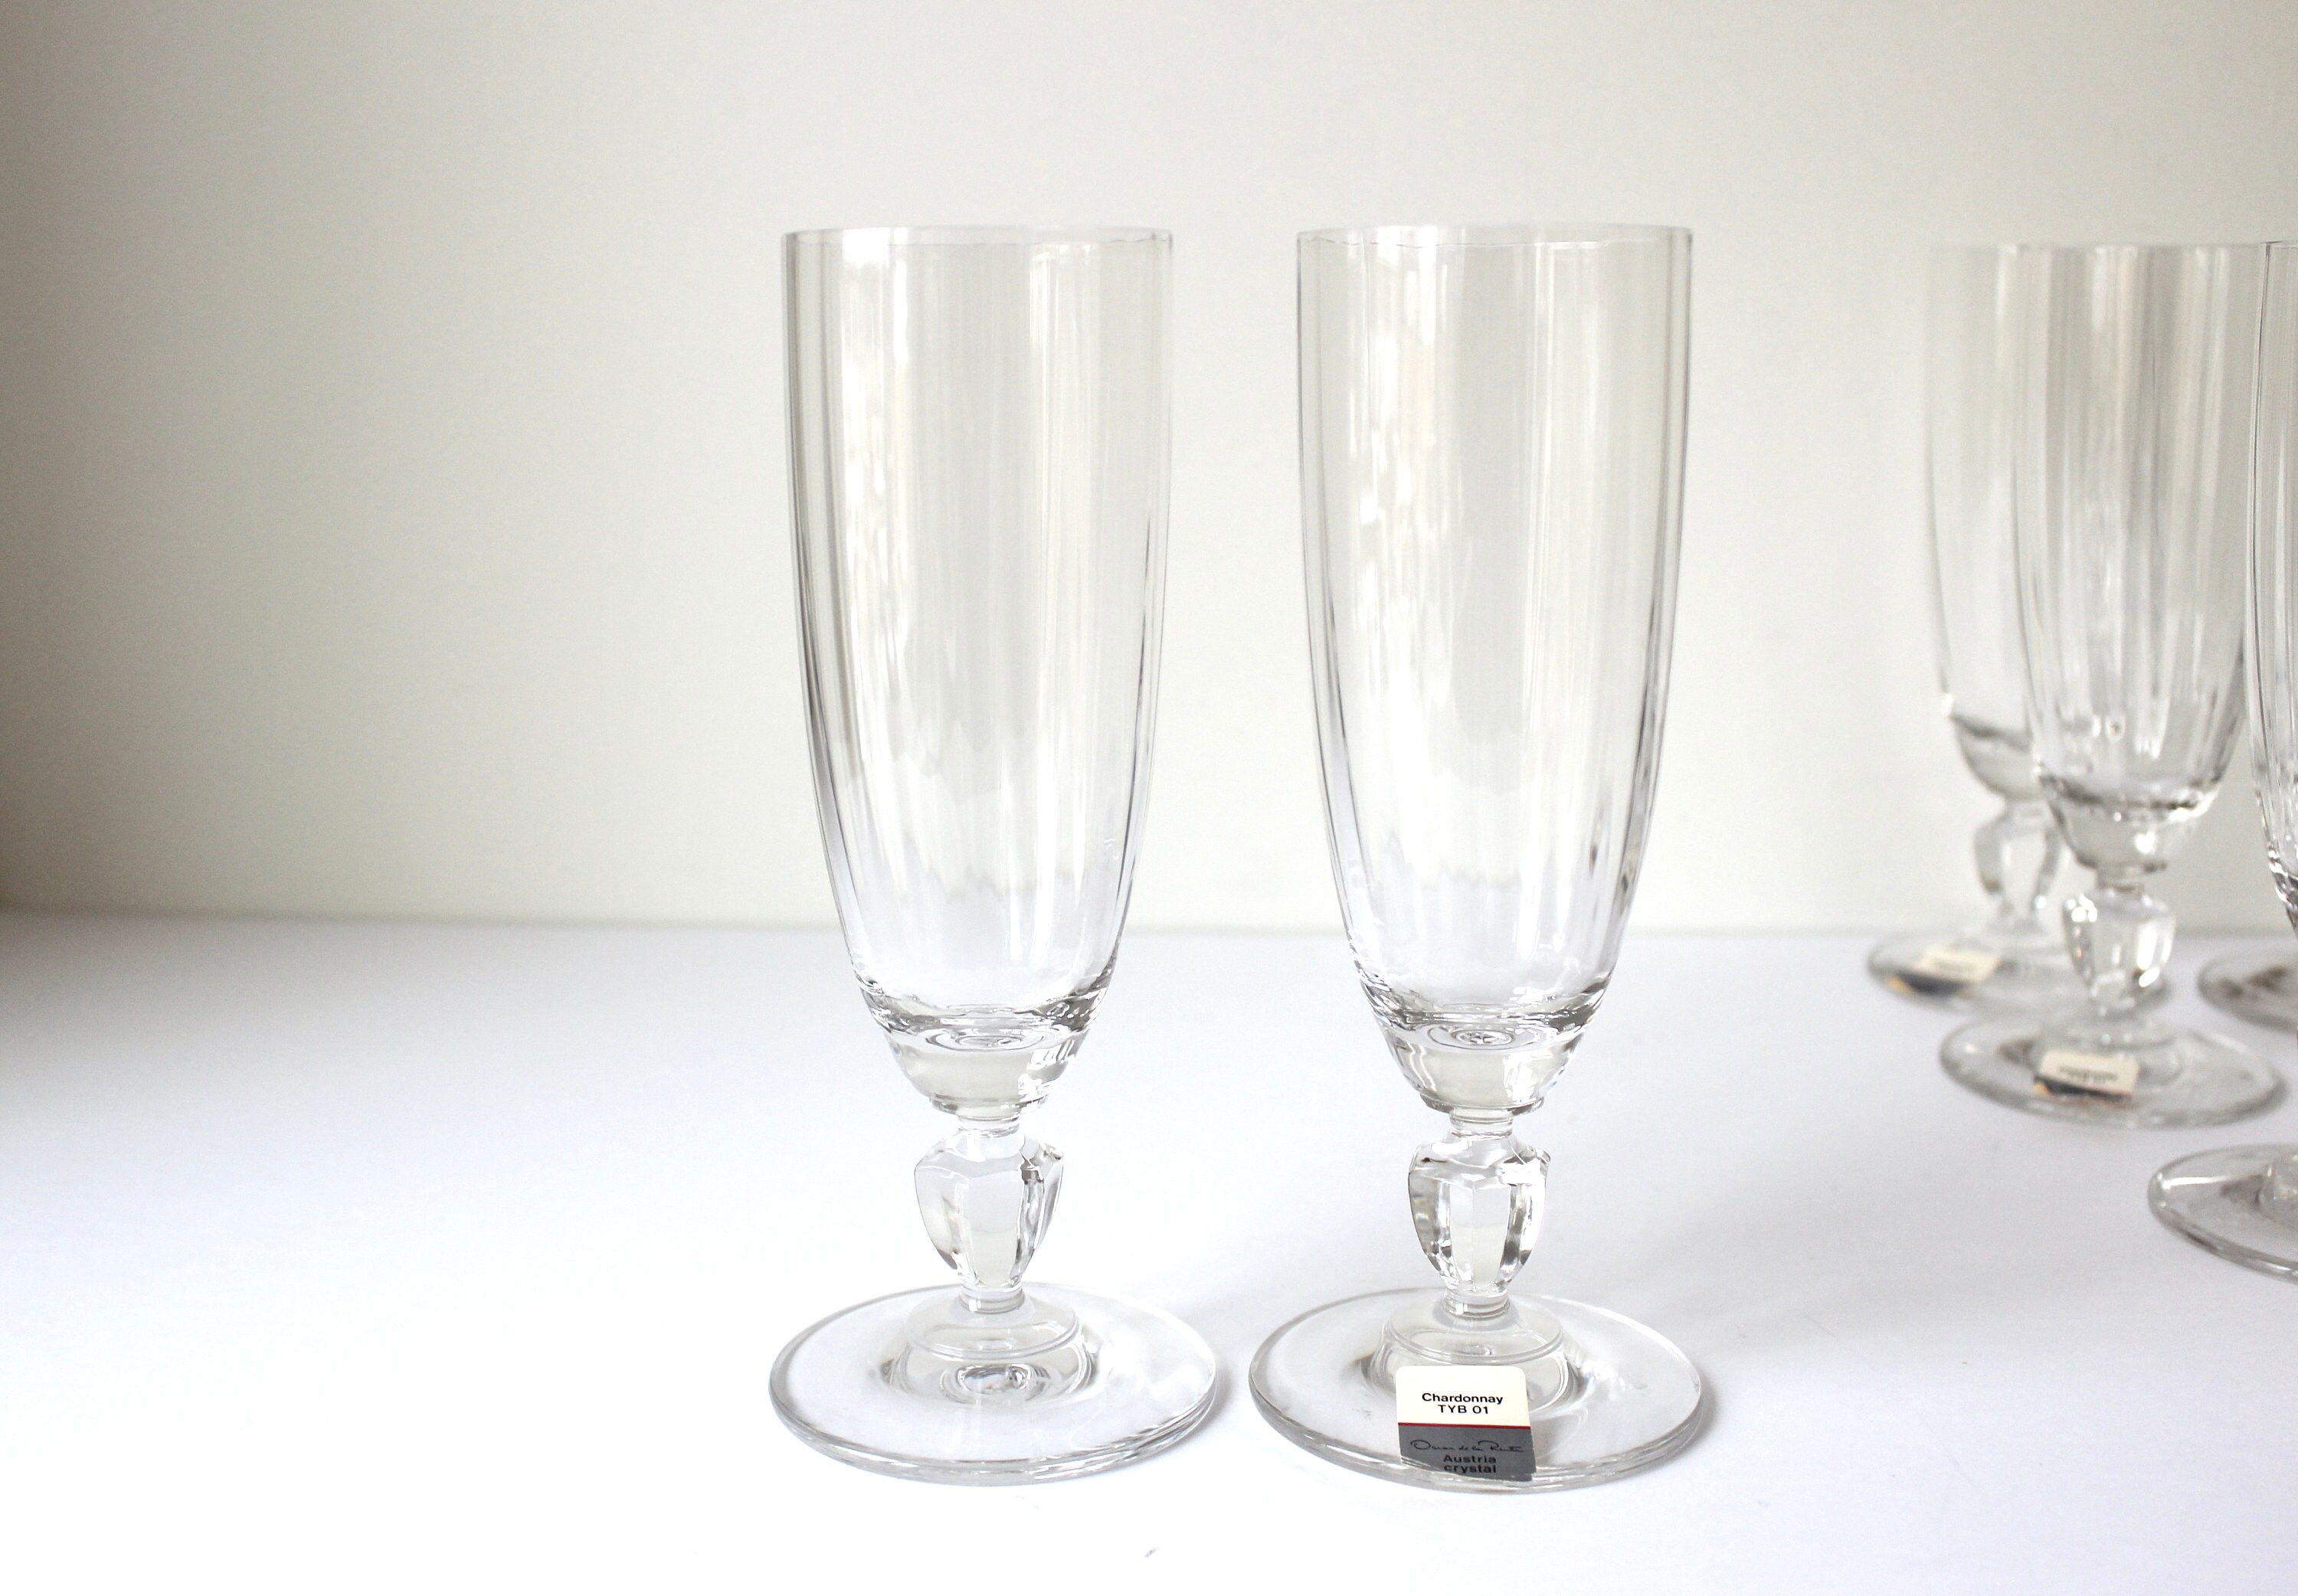 ROVSYA Champagne Flutes Set of 2, Hand Blown Crystal Wedding Champagne  Glasses, 5 oz-Made of Pure Le…See more ROVSYA Champagne Flutes Set of 2,  Hand